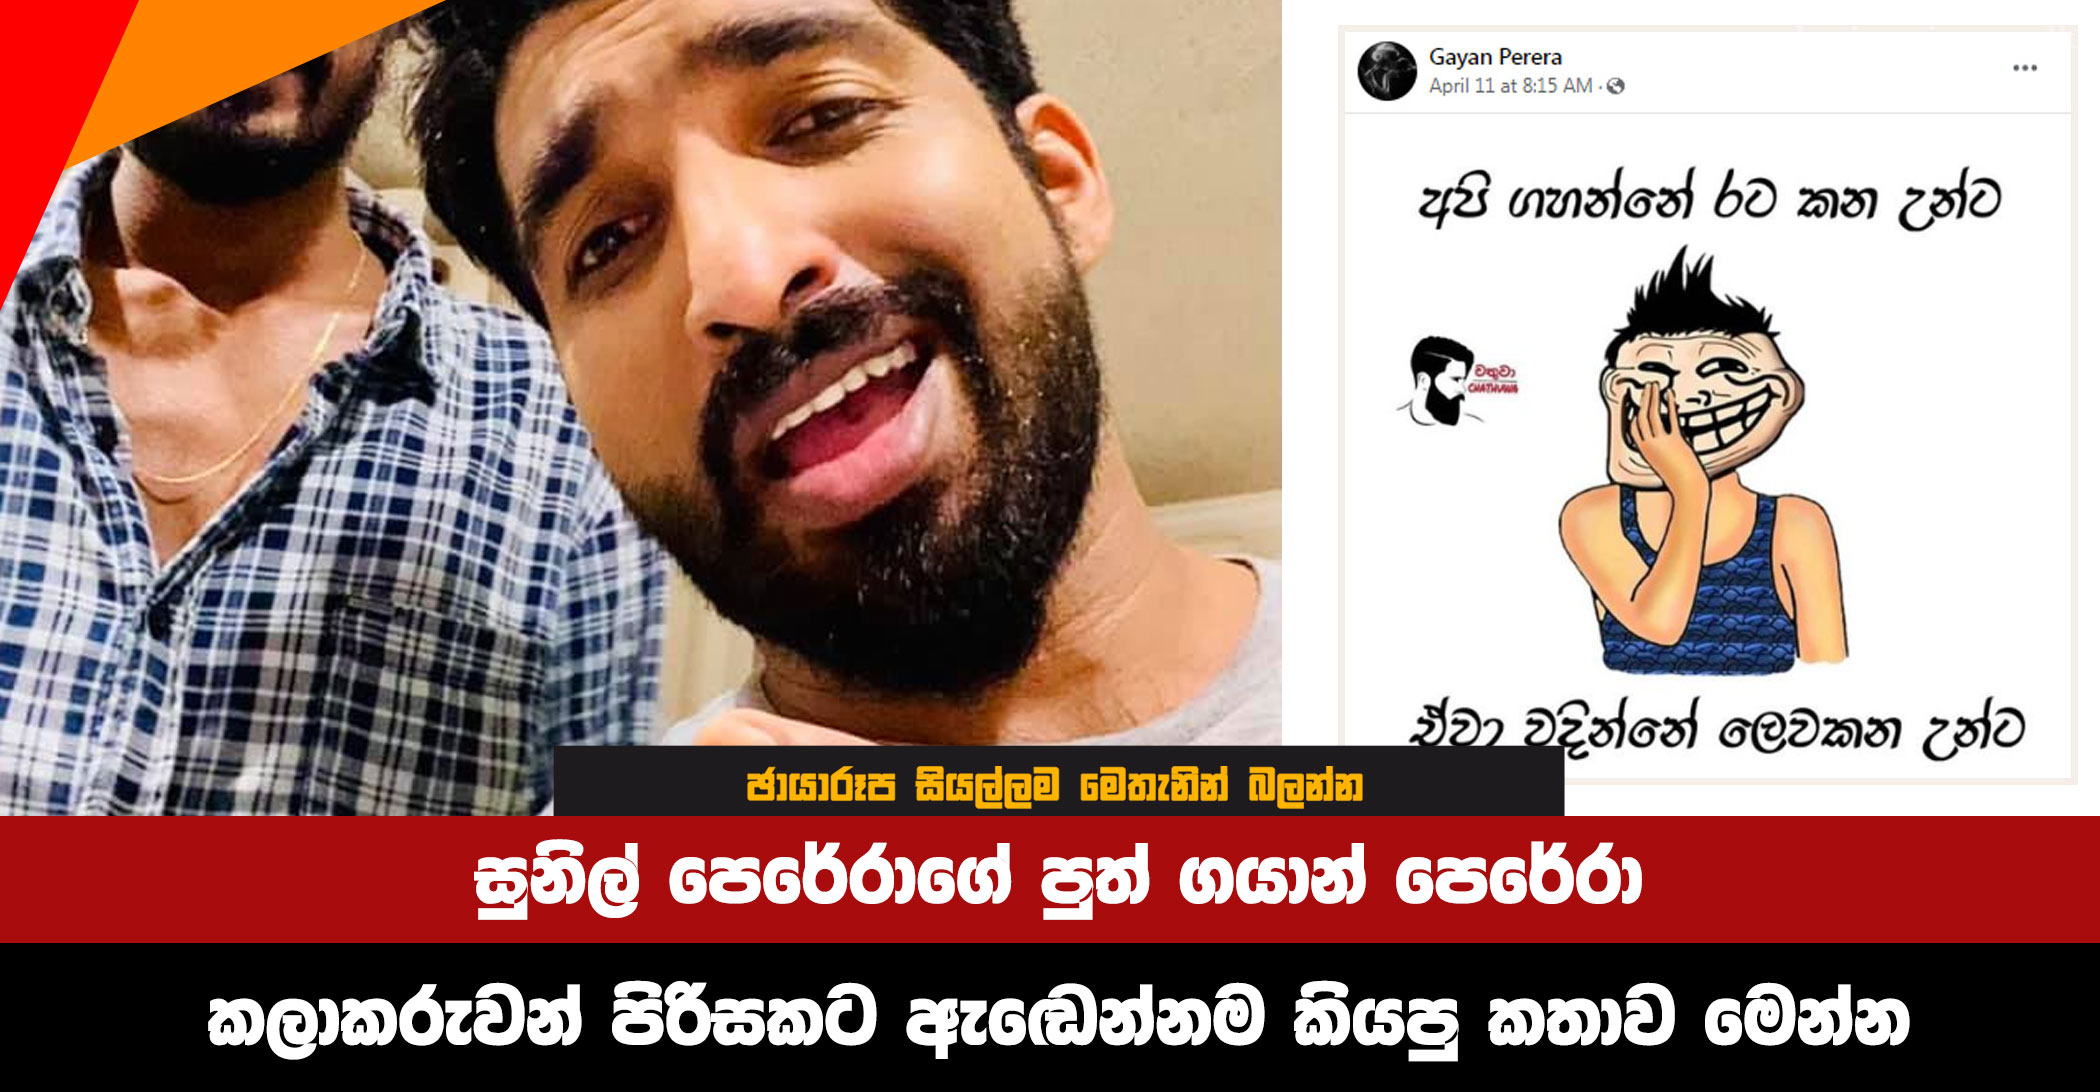 Here-is-the-story-told-by-Sunil-Perera's-son-Gayan-Perera-to-a-group-of-artists-in-tears